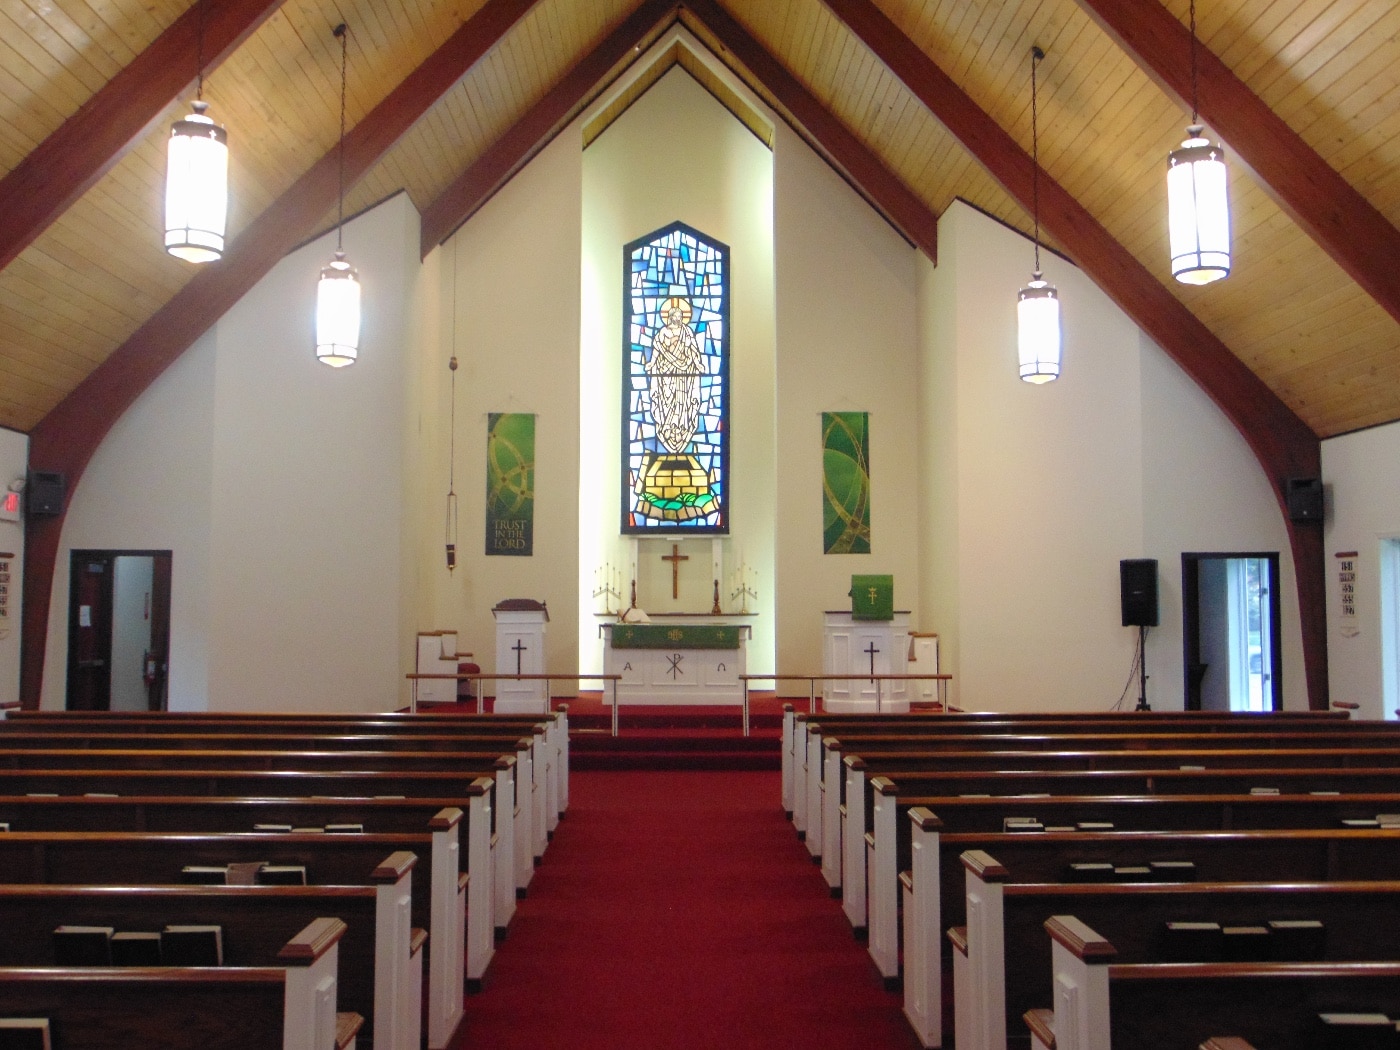 This is a digital photograph of the inside of a church. We can see two exterior doors on either side of the altar in addition to the pews.